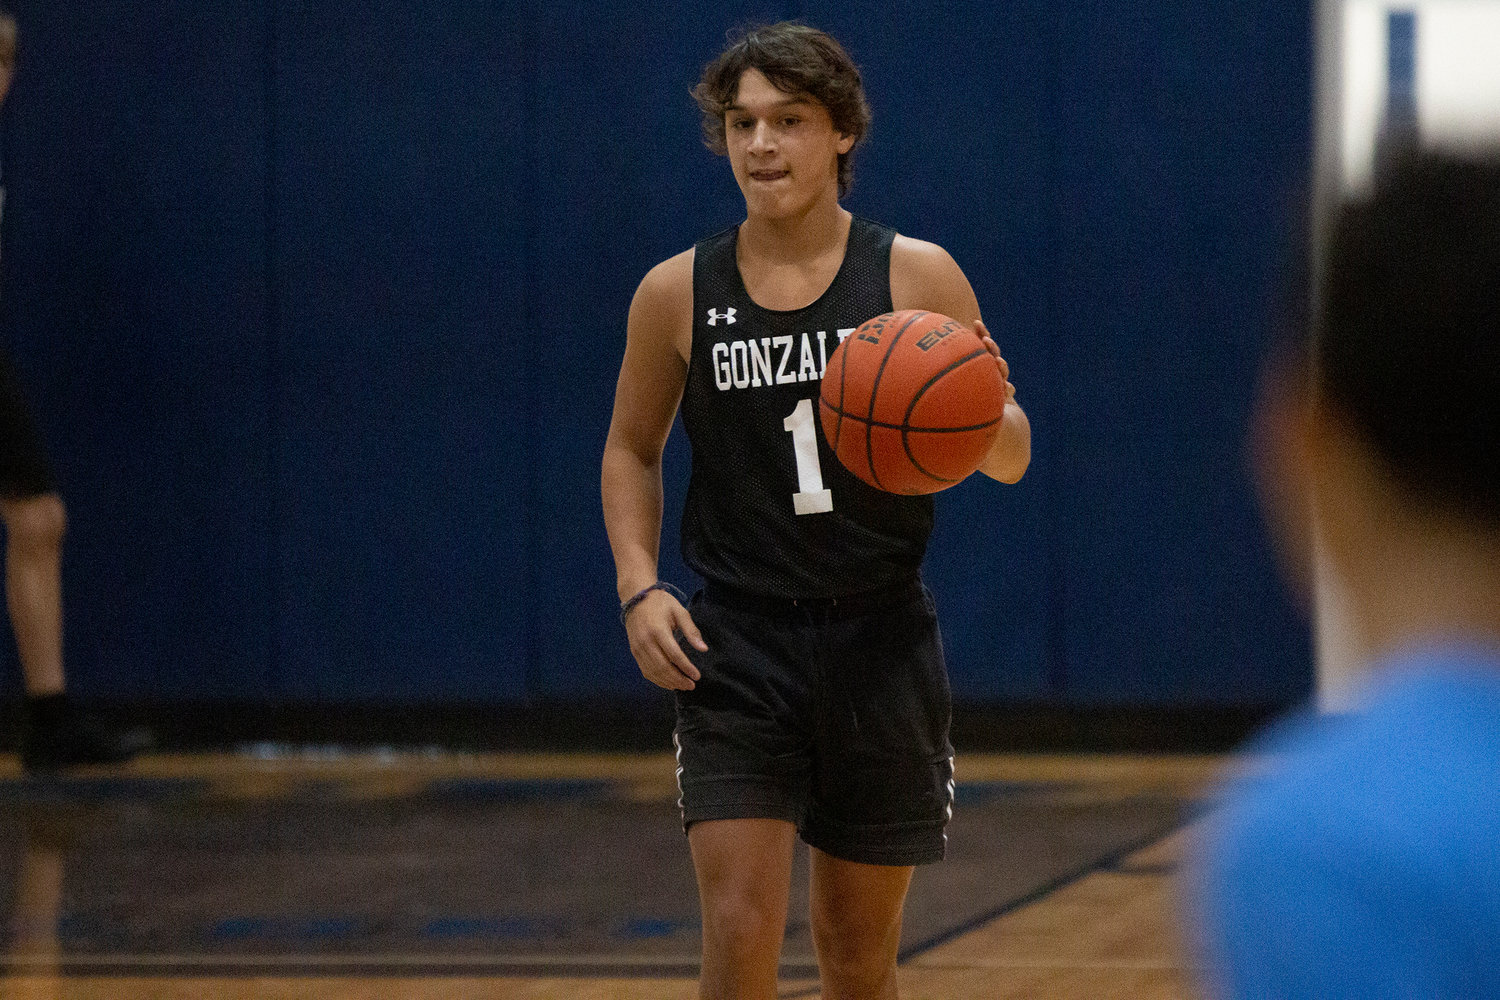 The Waelder Wildcats hosted a summer basketball league in July, playing against schools nearby like Schulenburg and (pictured) the Gonzales Apaches. The games gave the basketball programs the opportunity to put their athletes in competitive situations.